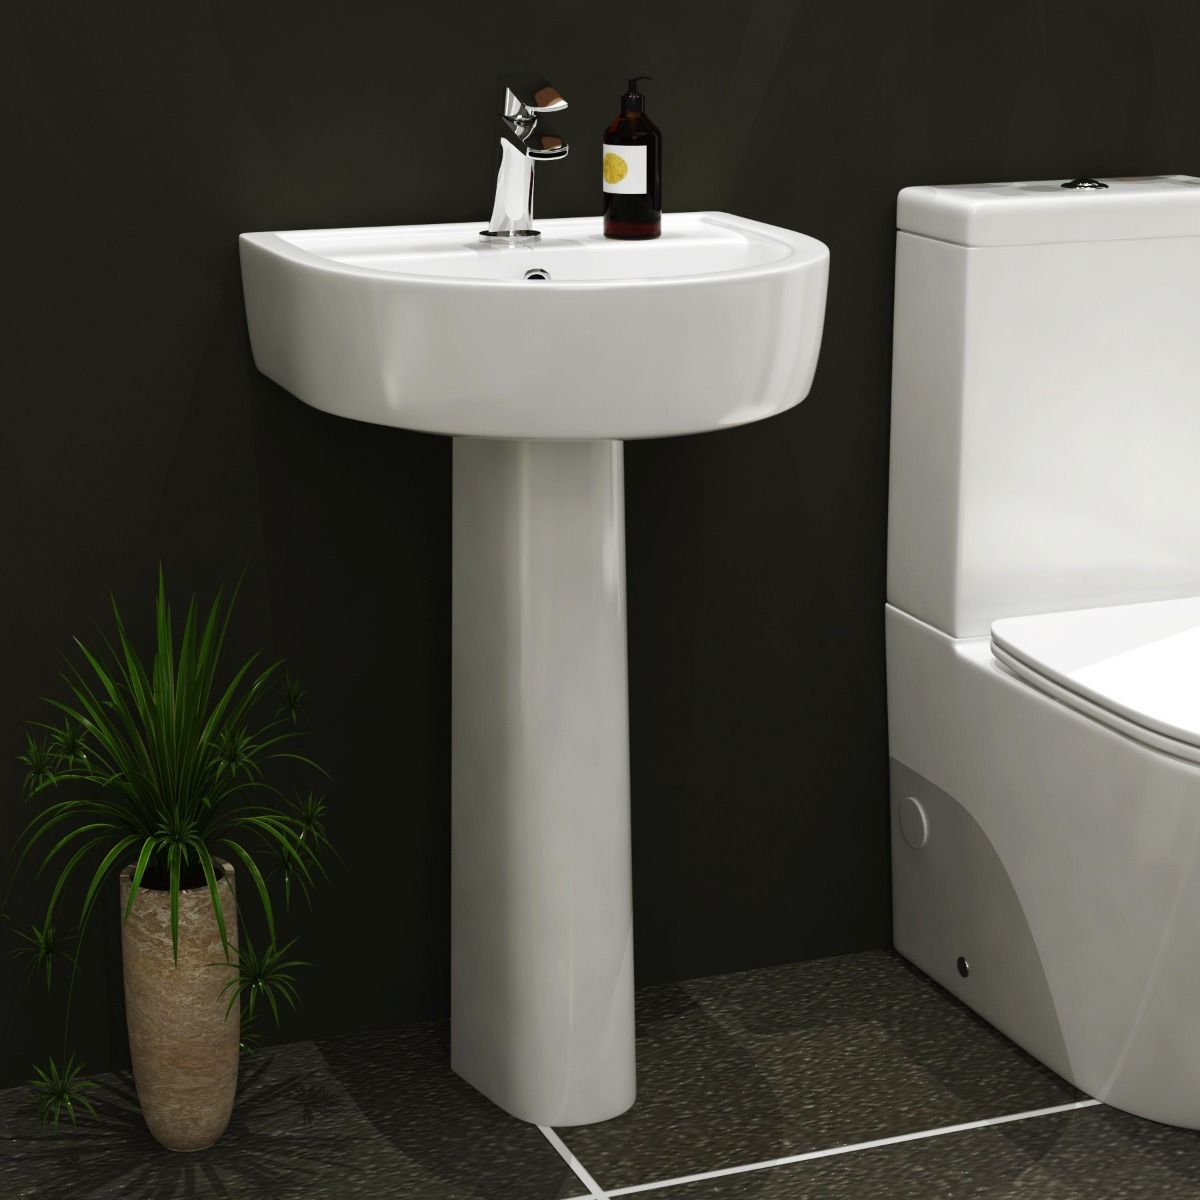 Contemporary Basins - Buying Guide!